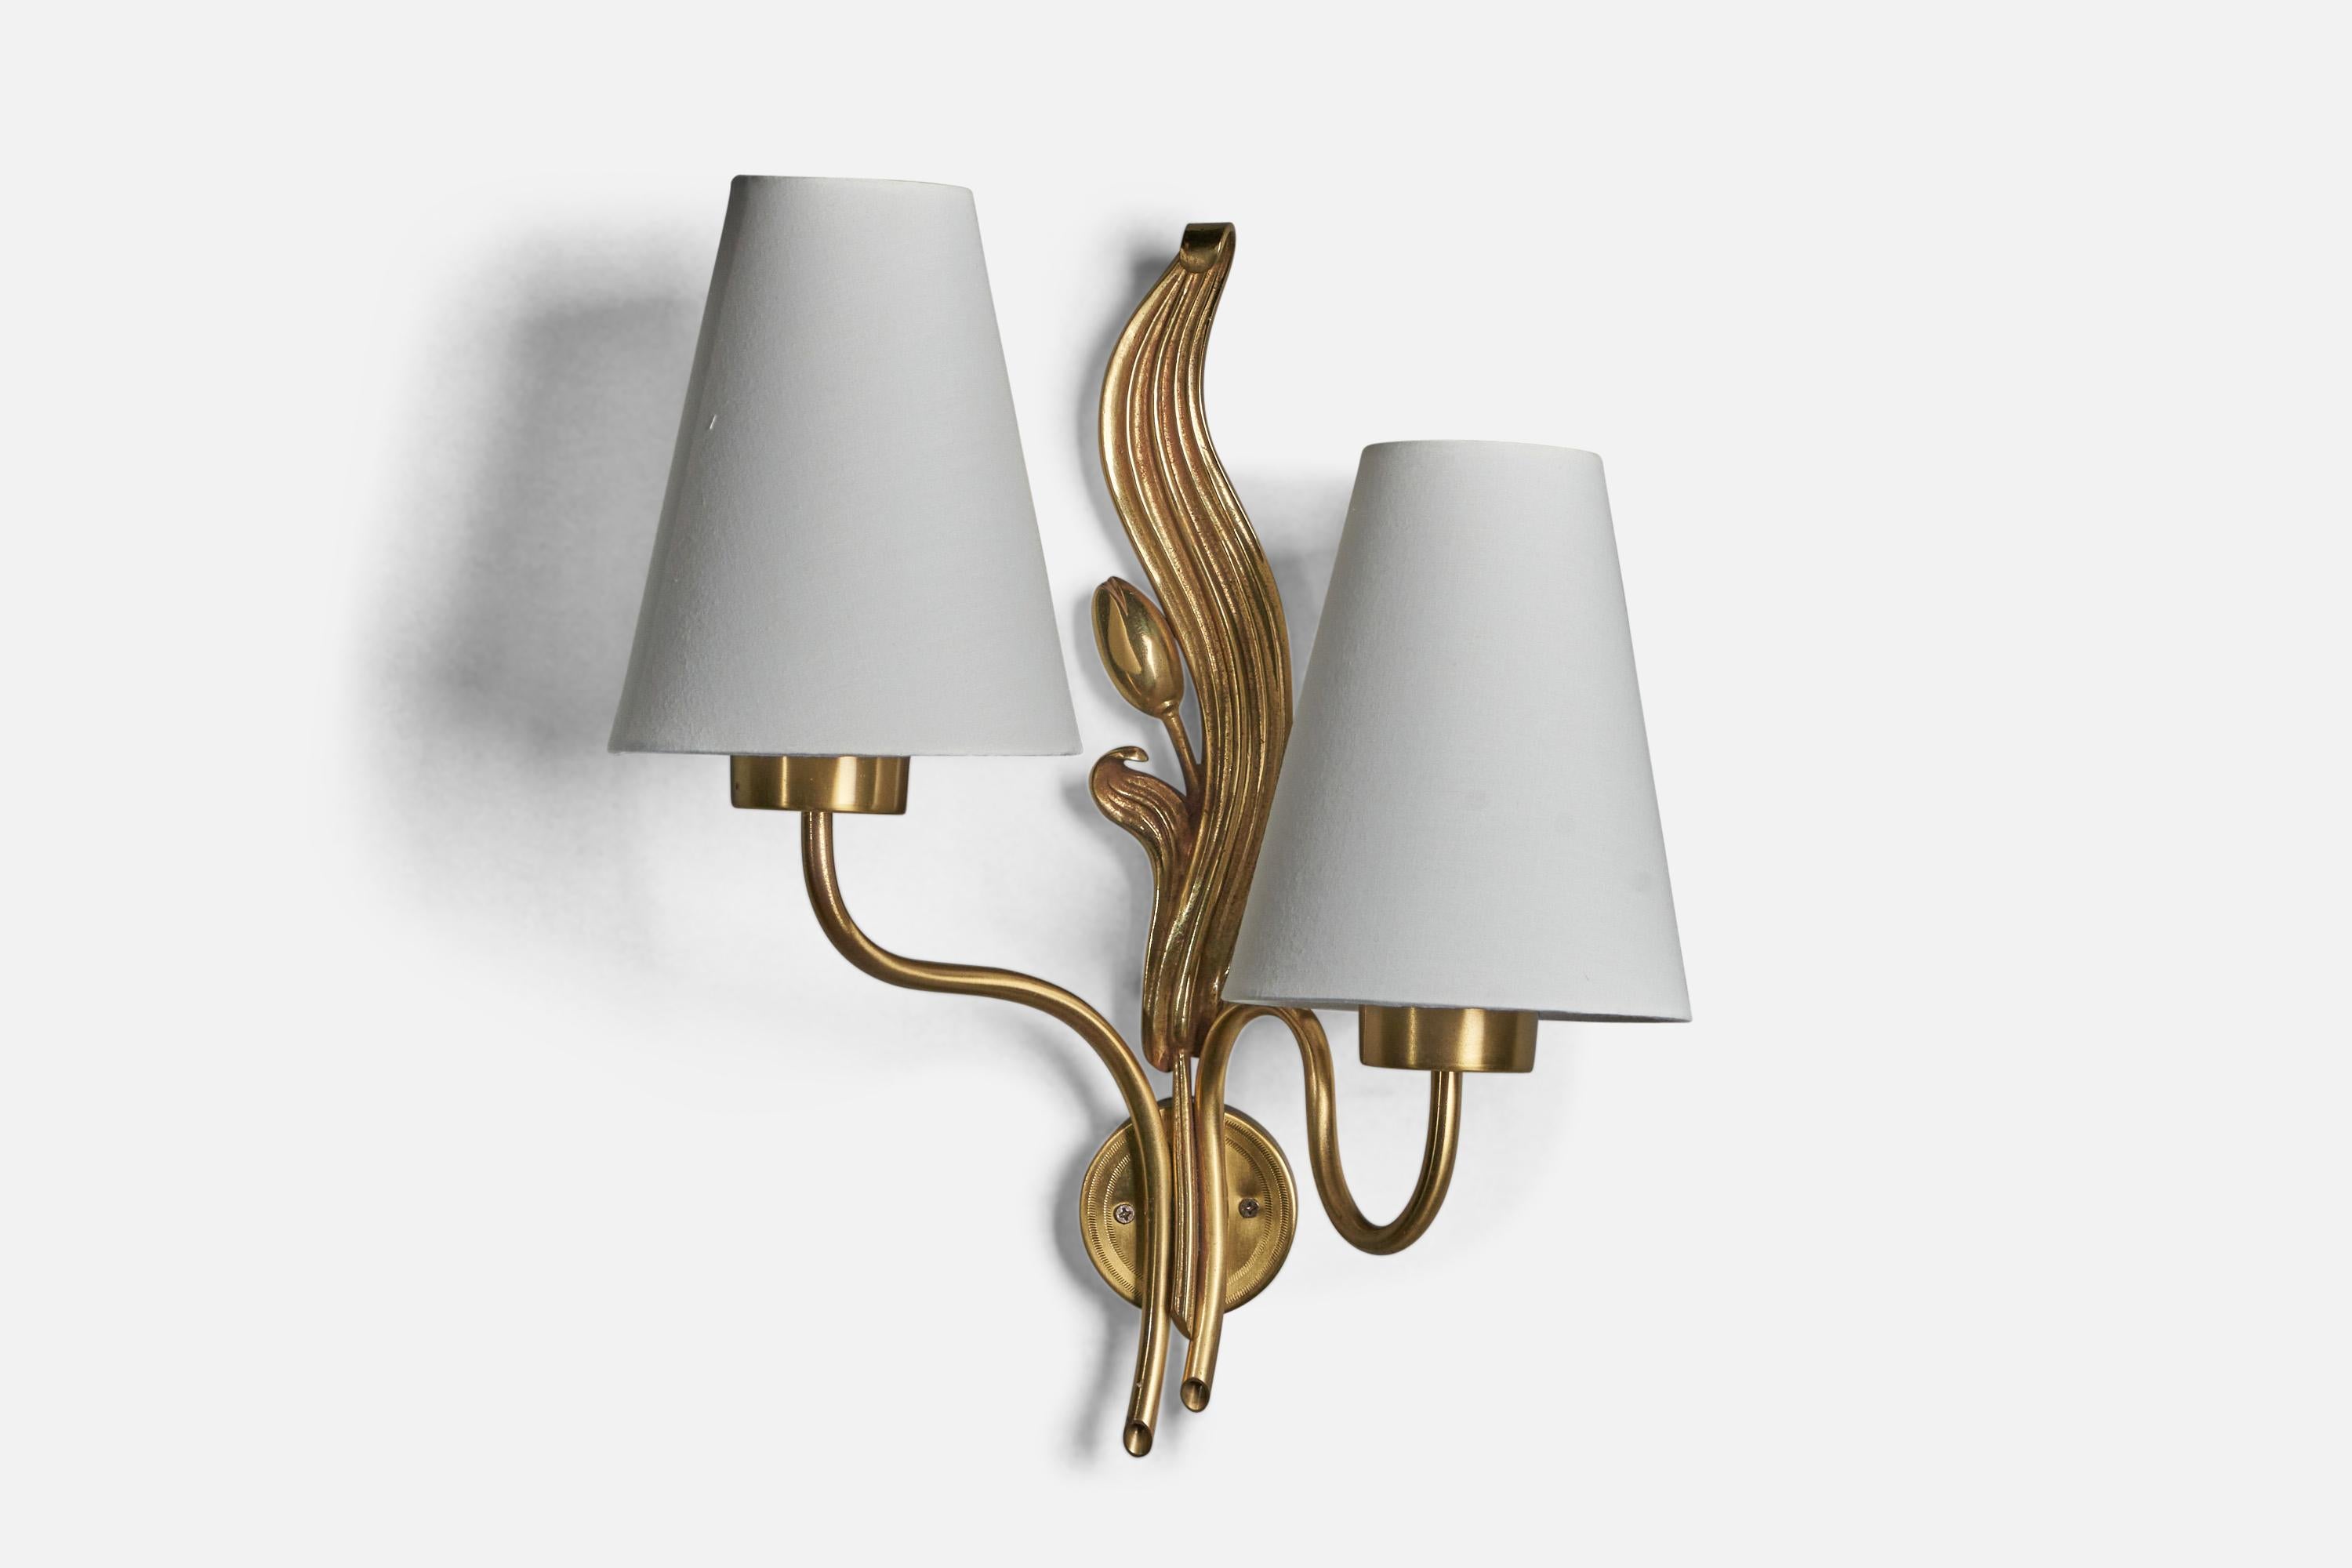 An organic two-armed brass and white fabric wall light designed and produced in Sweden, 1940s.

An organic two-armed brass and white fabric wall light designed and produced in Sweden, 1940s.

Overall Dimensions (inches): 16” H x 12.75” W x 7”